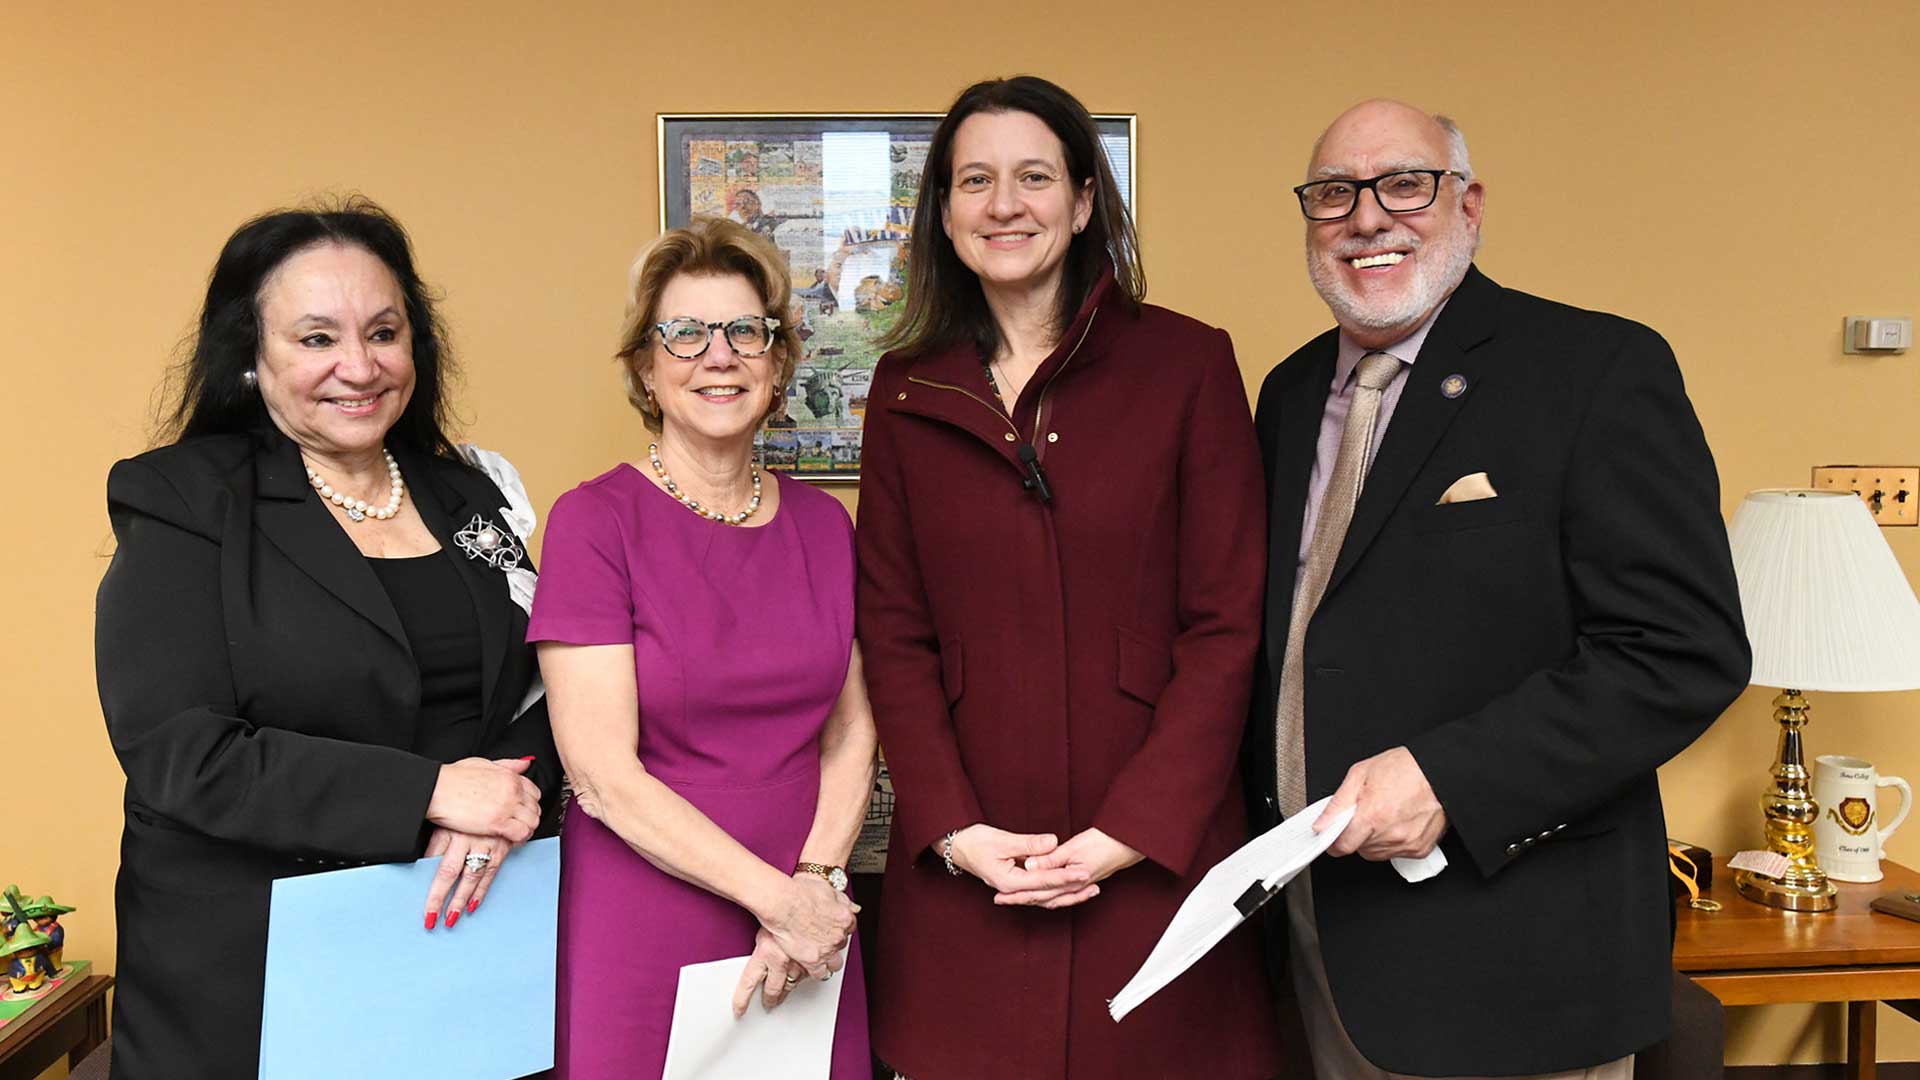 President Melinda Person and the State Education Commissioner jointly deliver new legislation to the Legislature's education leaders, Senator Shelley Mayer and Assemblymember Michael Benedetto, that would rewrite the flawed teacher evaluation system and restore local control.